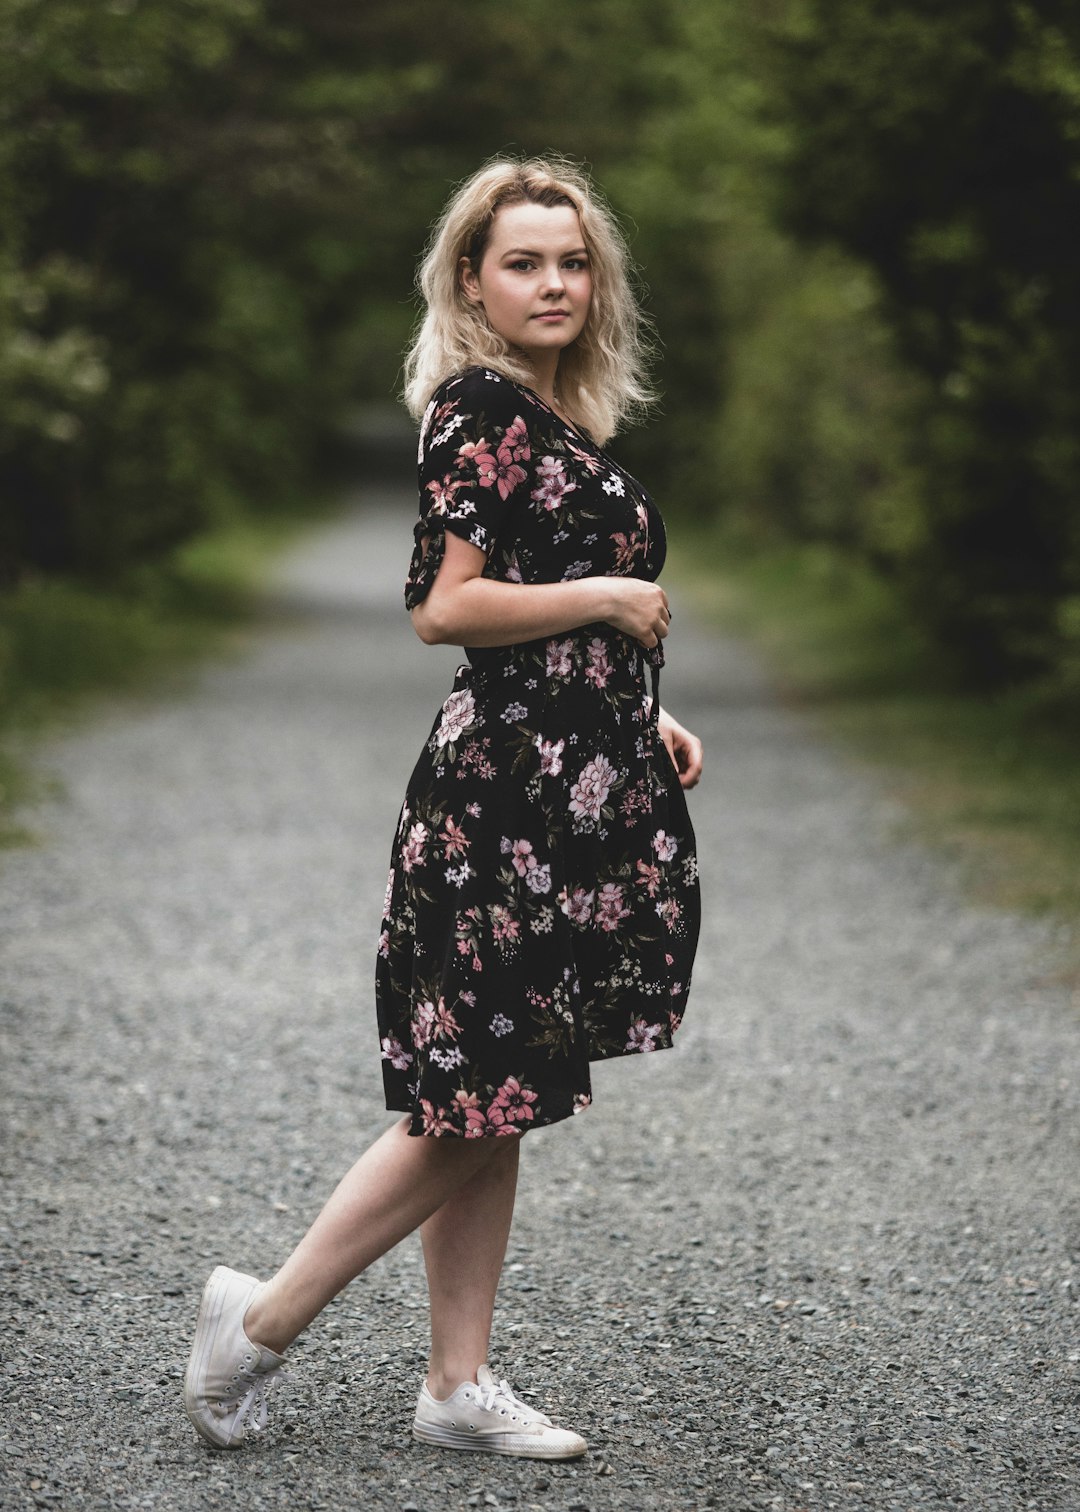 girl in black and white floral dress standing on gray asphalt road during daytime